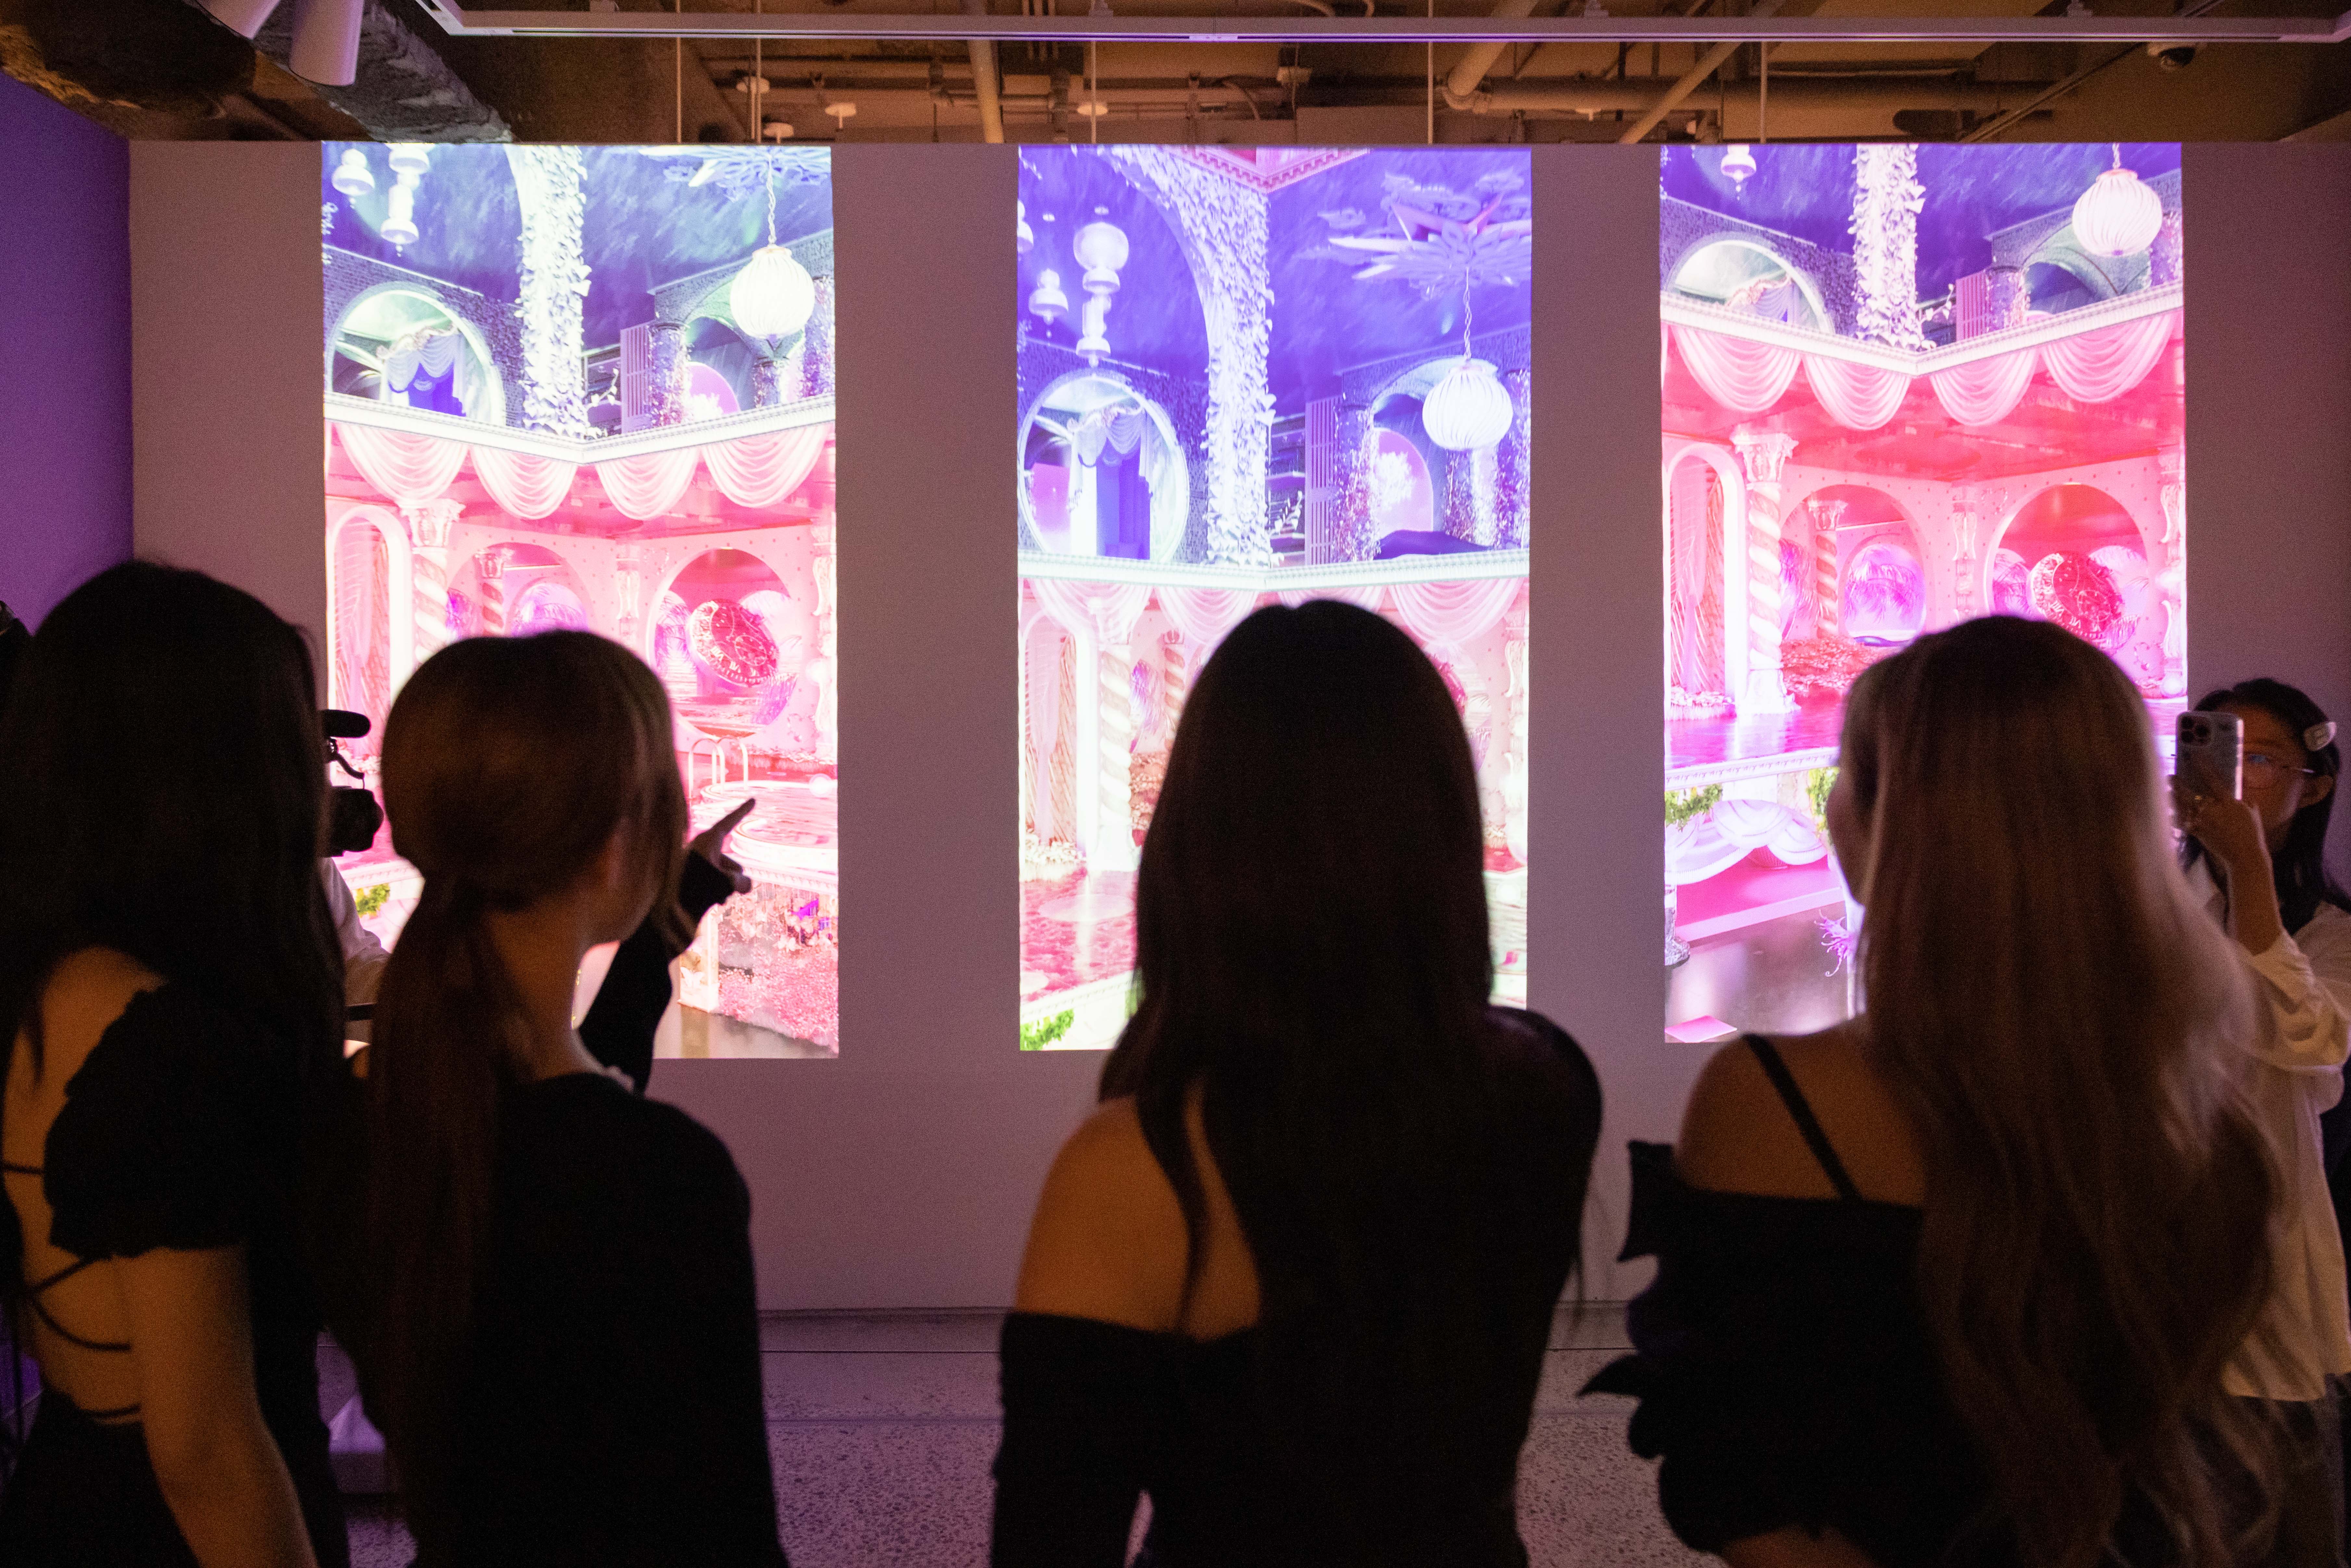 Members of female K-Pop group Aespa (from R) Ningning, Giselle, Winter and Karina look at their NFT artwork during the launch event for their NFT collection at Sotheby’s on October 14, 2022 in New York. – AFP n